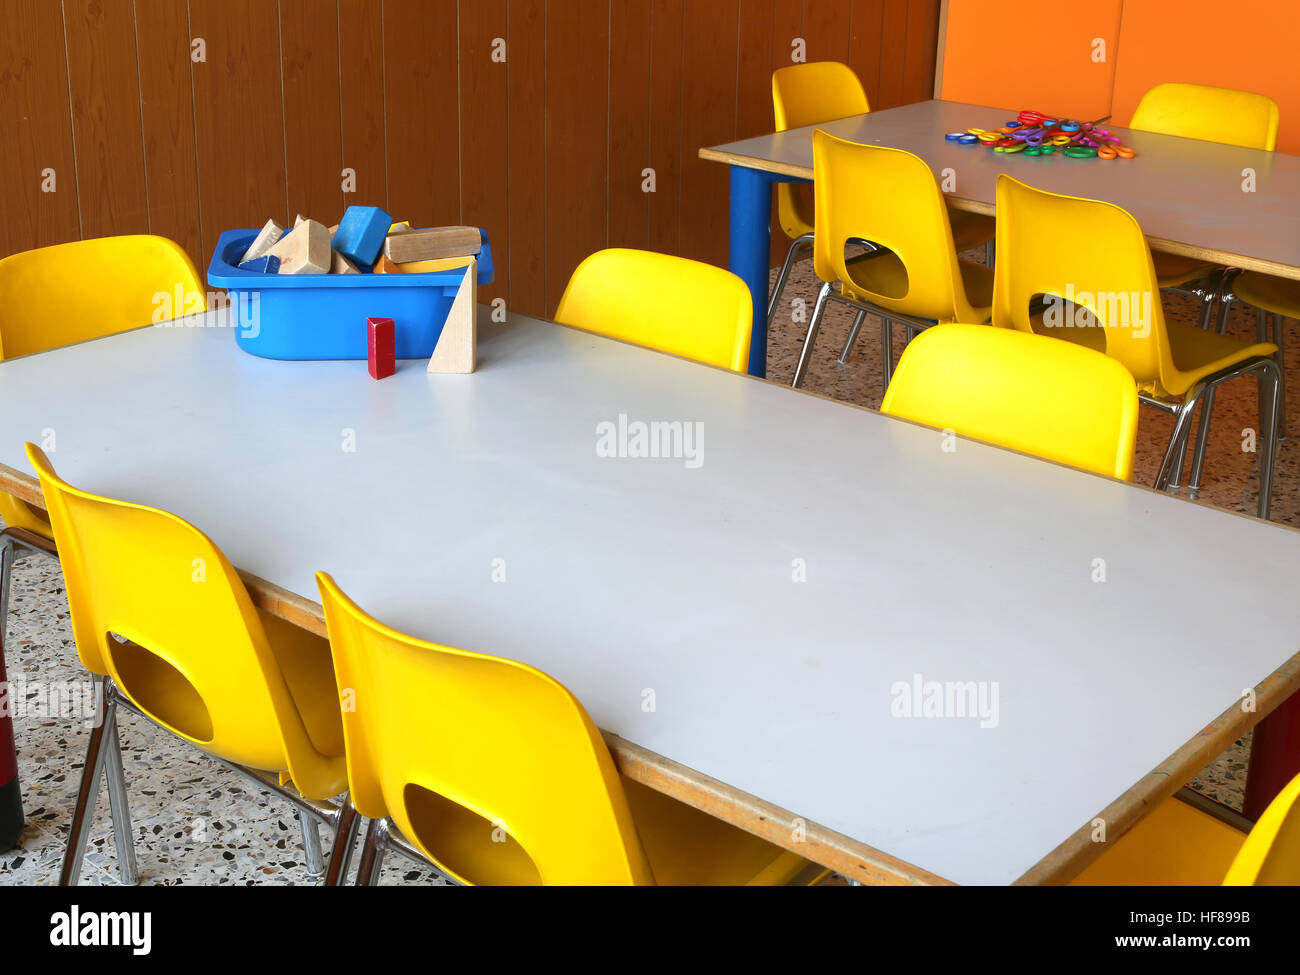 Tables And Chairs In The Classroom Of Kindergarten Without